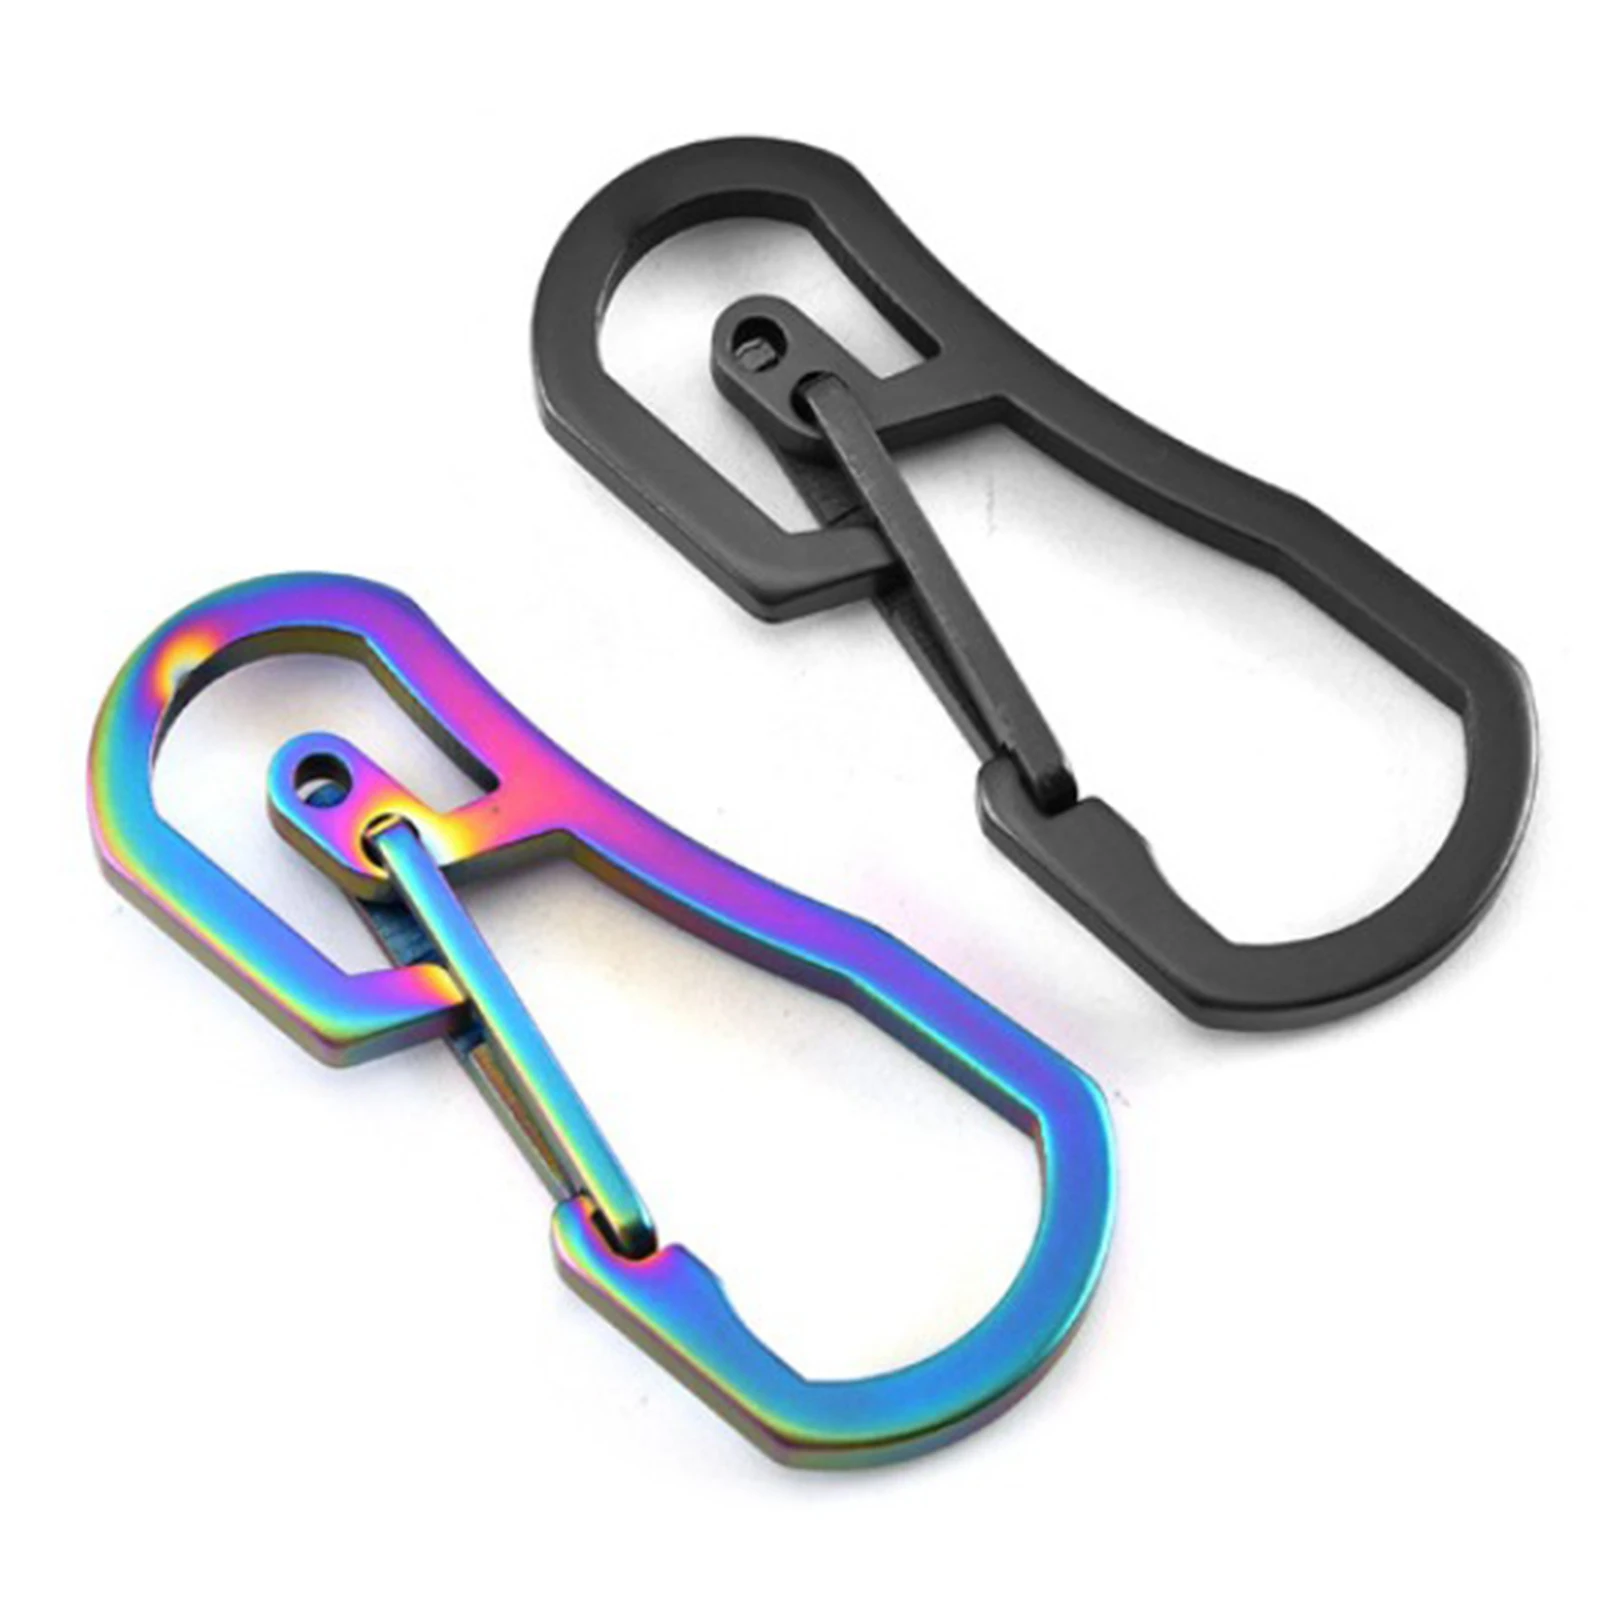 Stainless Steel Carabiner Key Ring Keychain Clip Hook Buckle Outdoor Hiking 